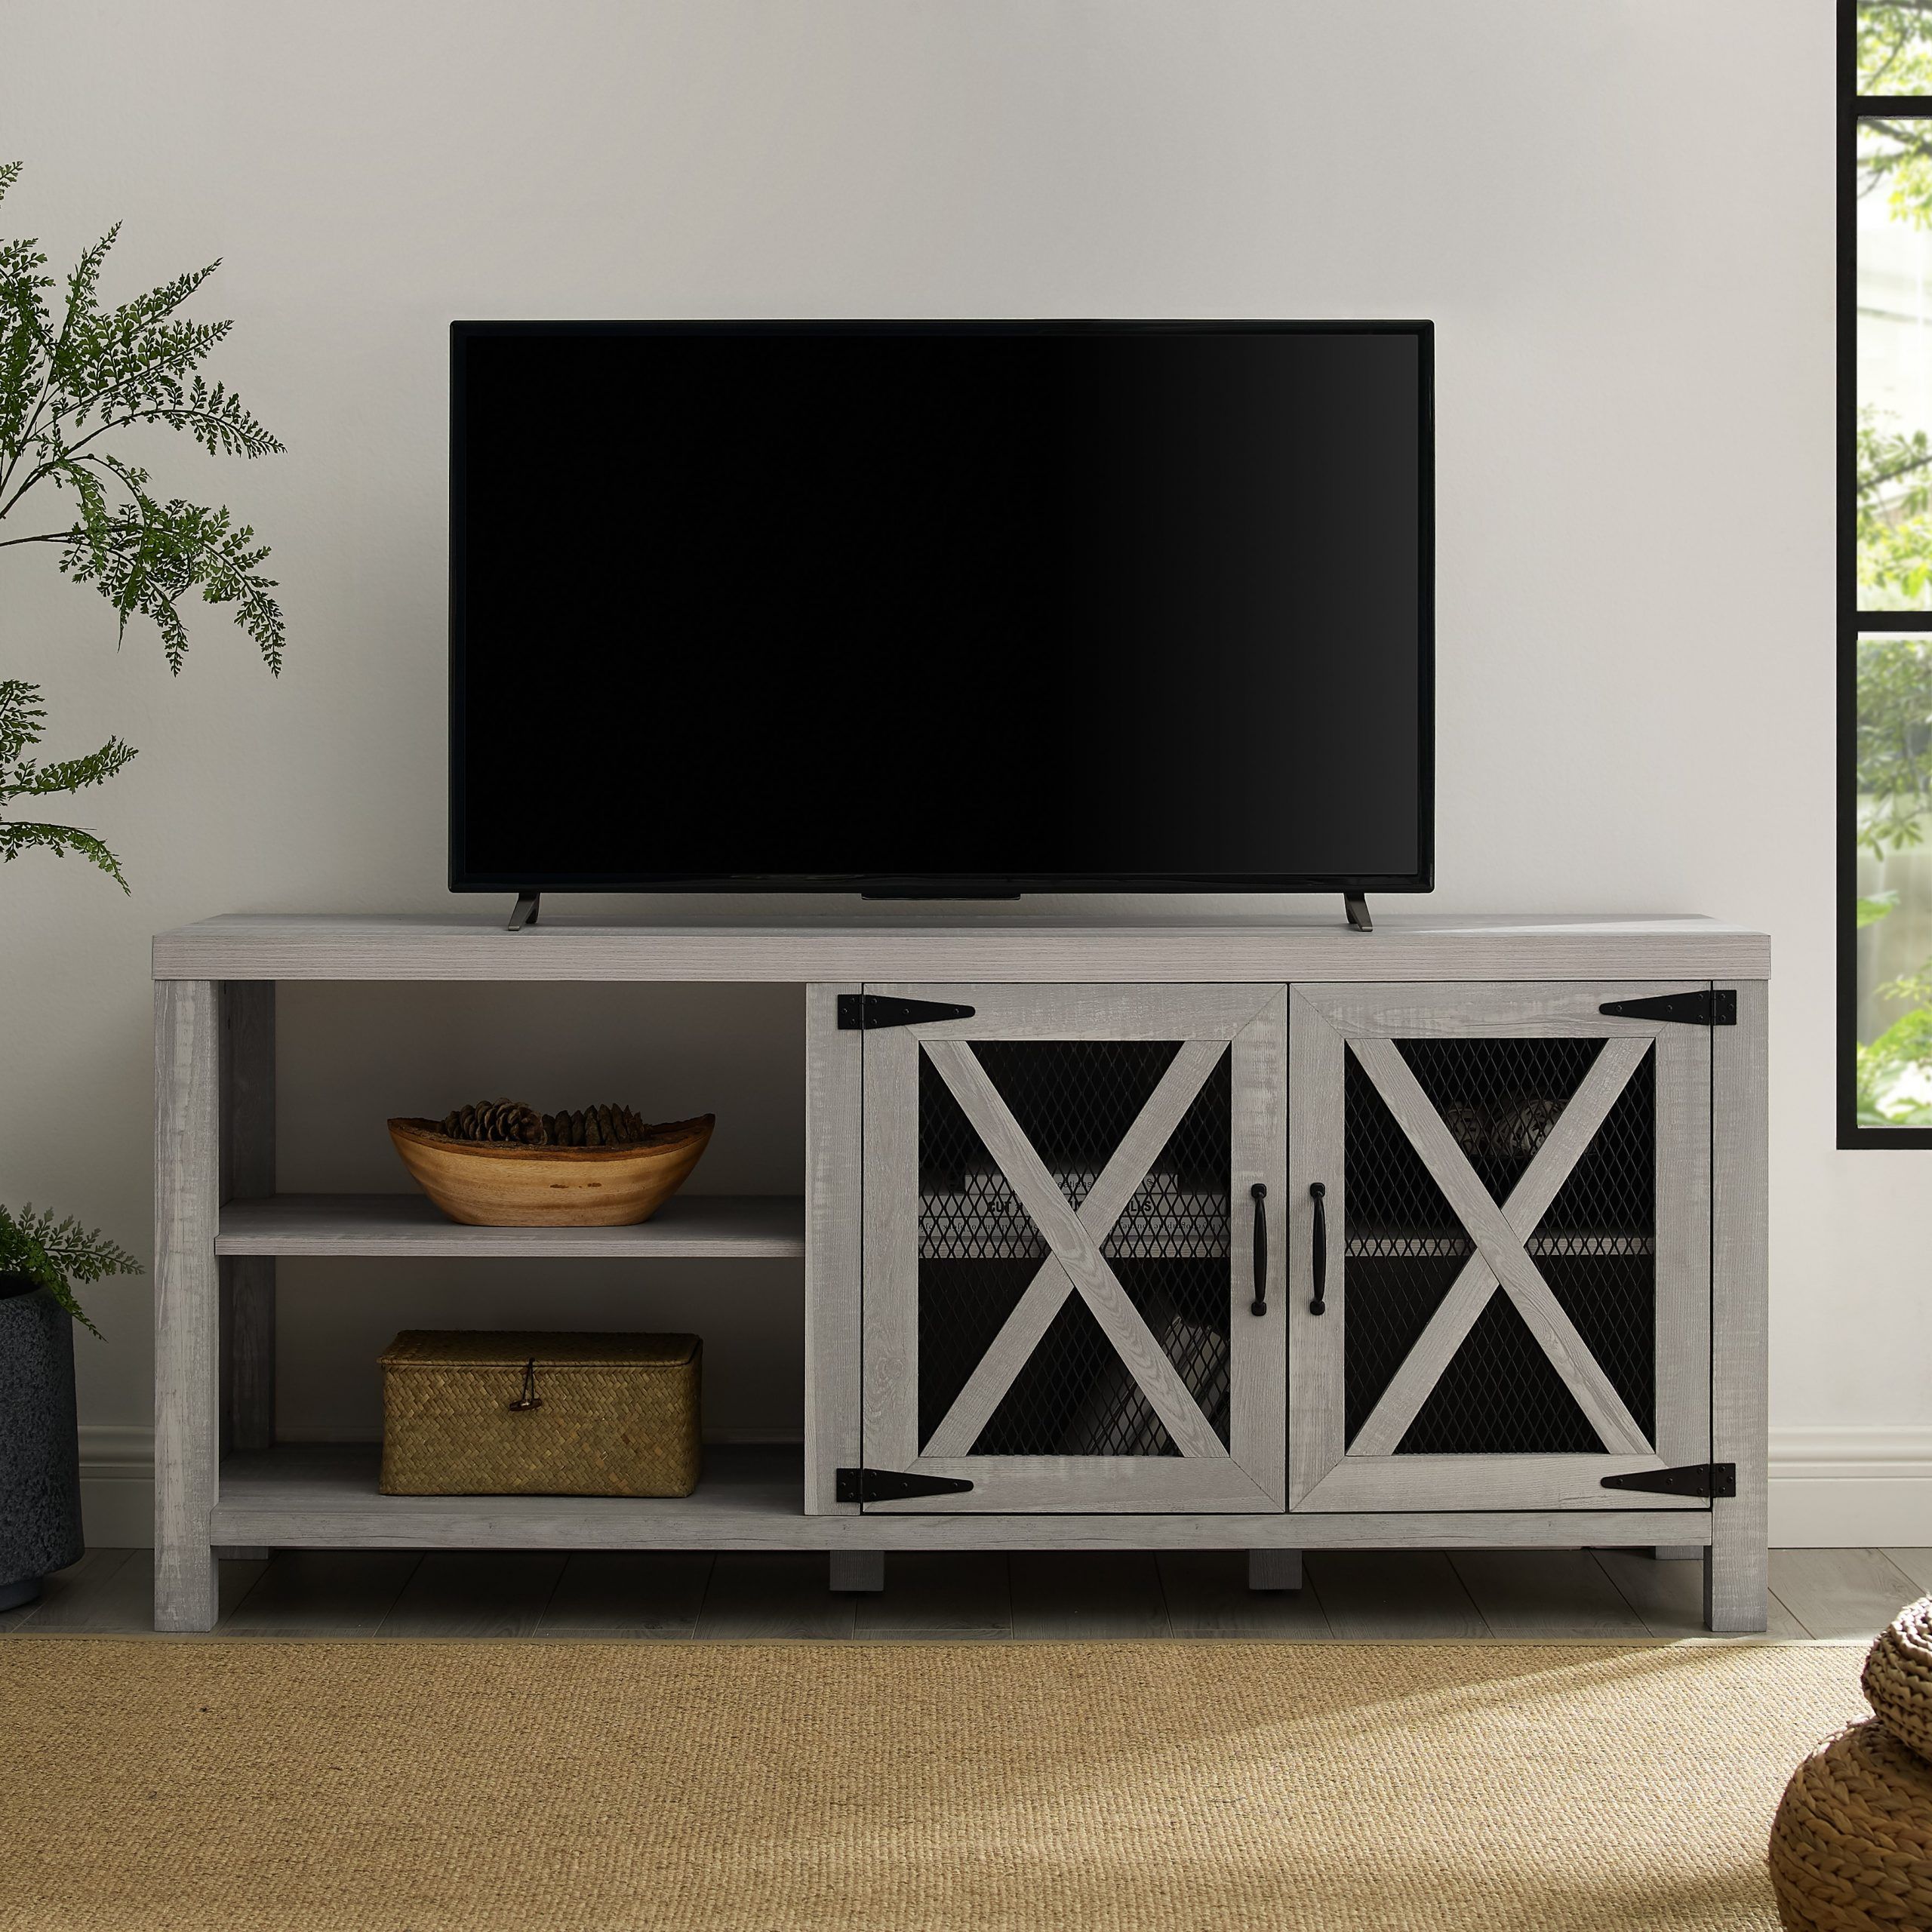 Manor Park Industrial Farmhouse Tv Stand For Tvs Up To 65 Intended For Industrial Tv Stands (View 11 of 15)